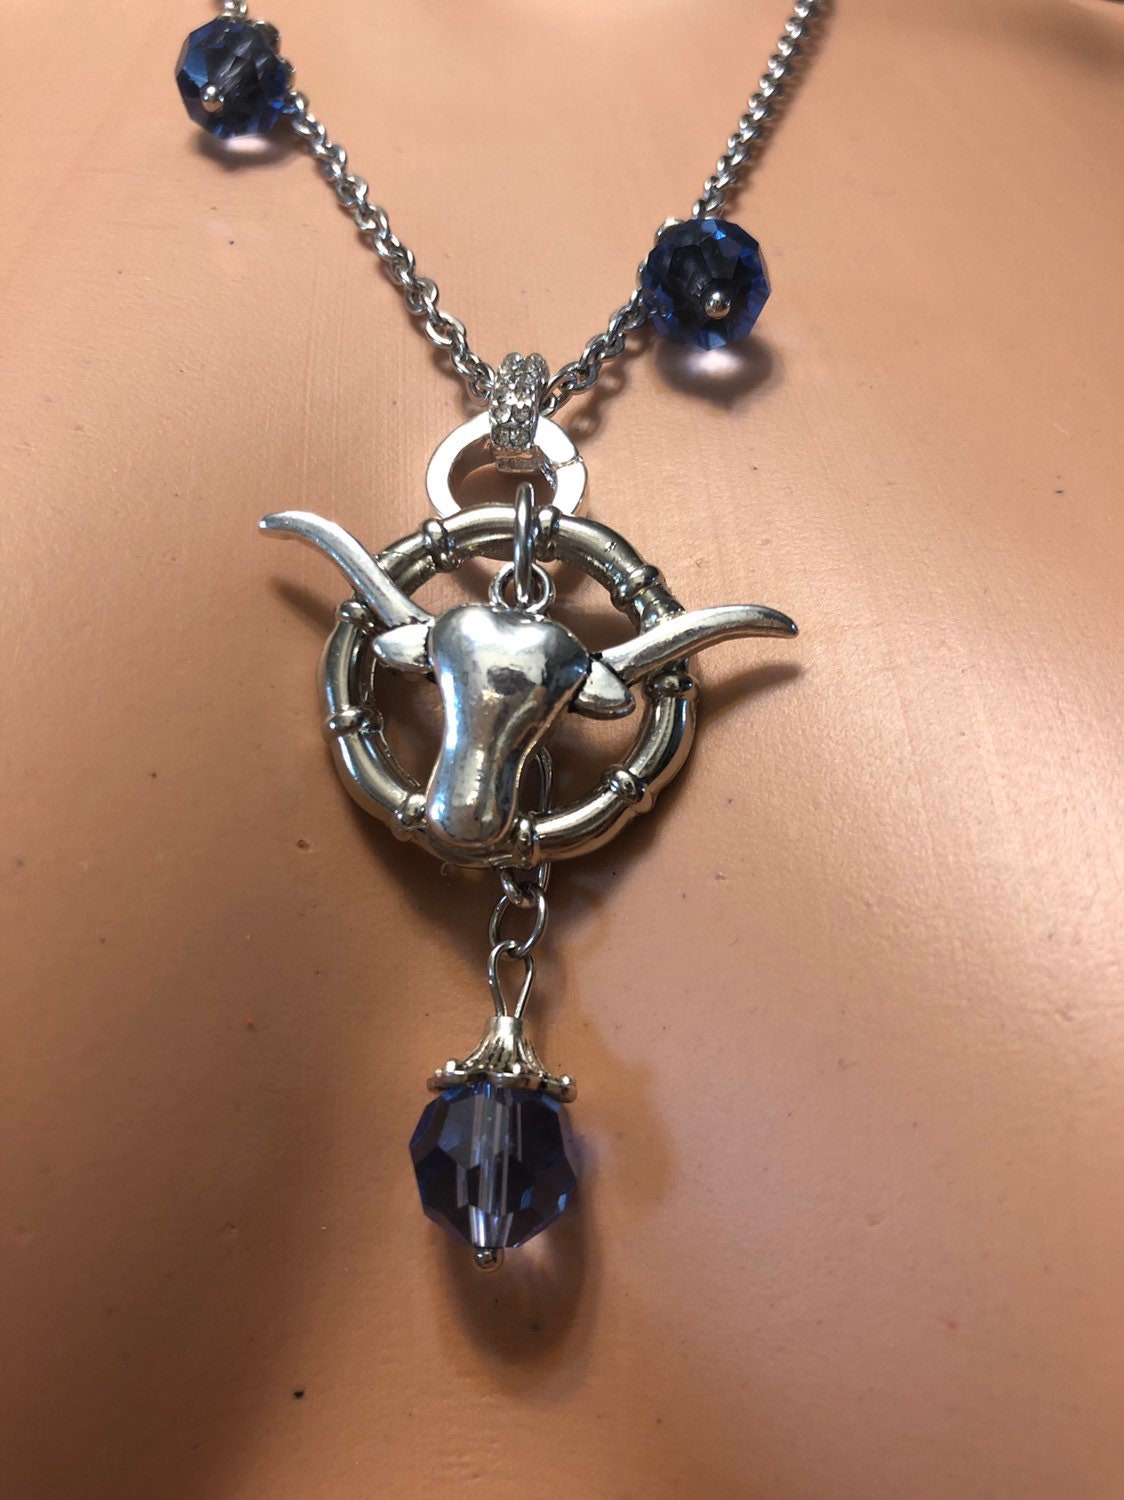 Handmade silver metal longhorn pendant with blue crystals necklace